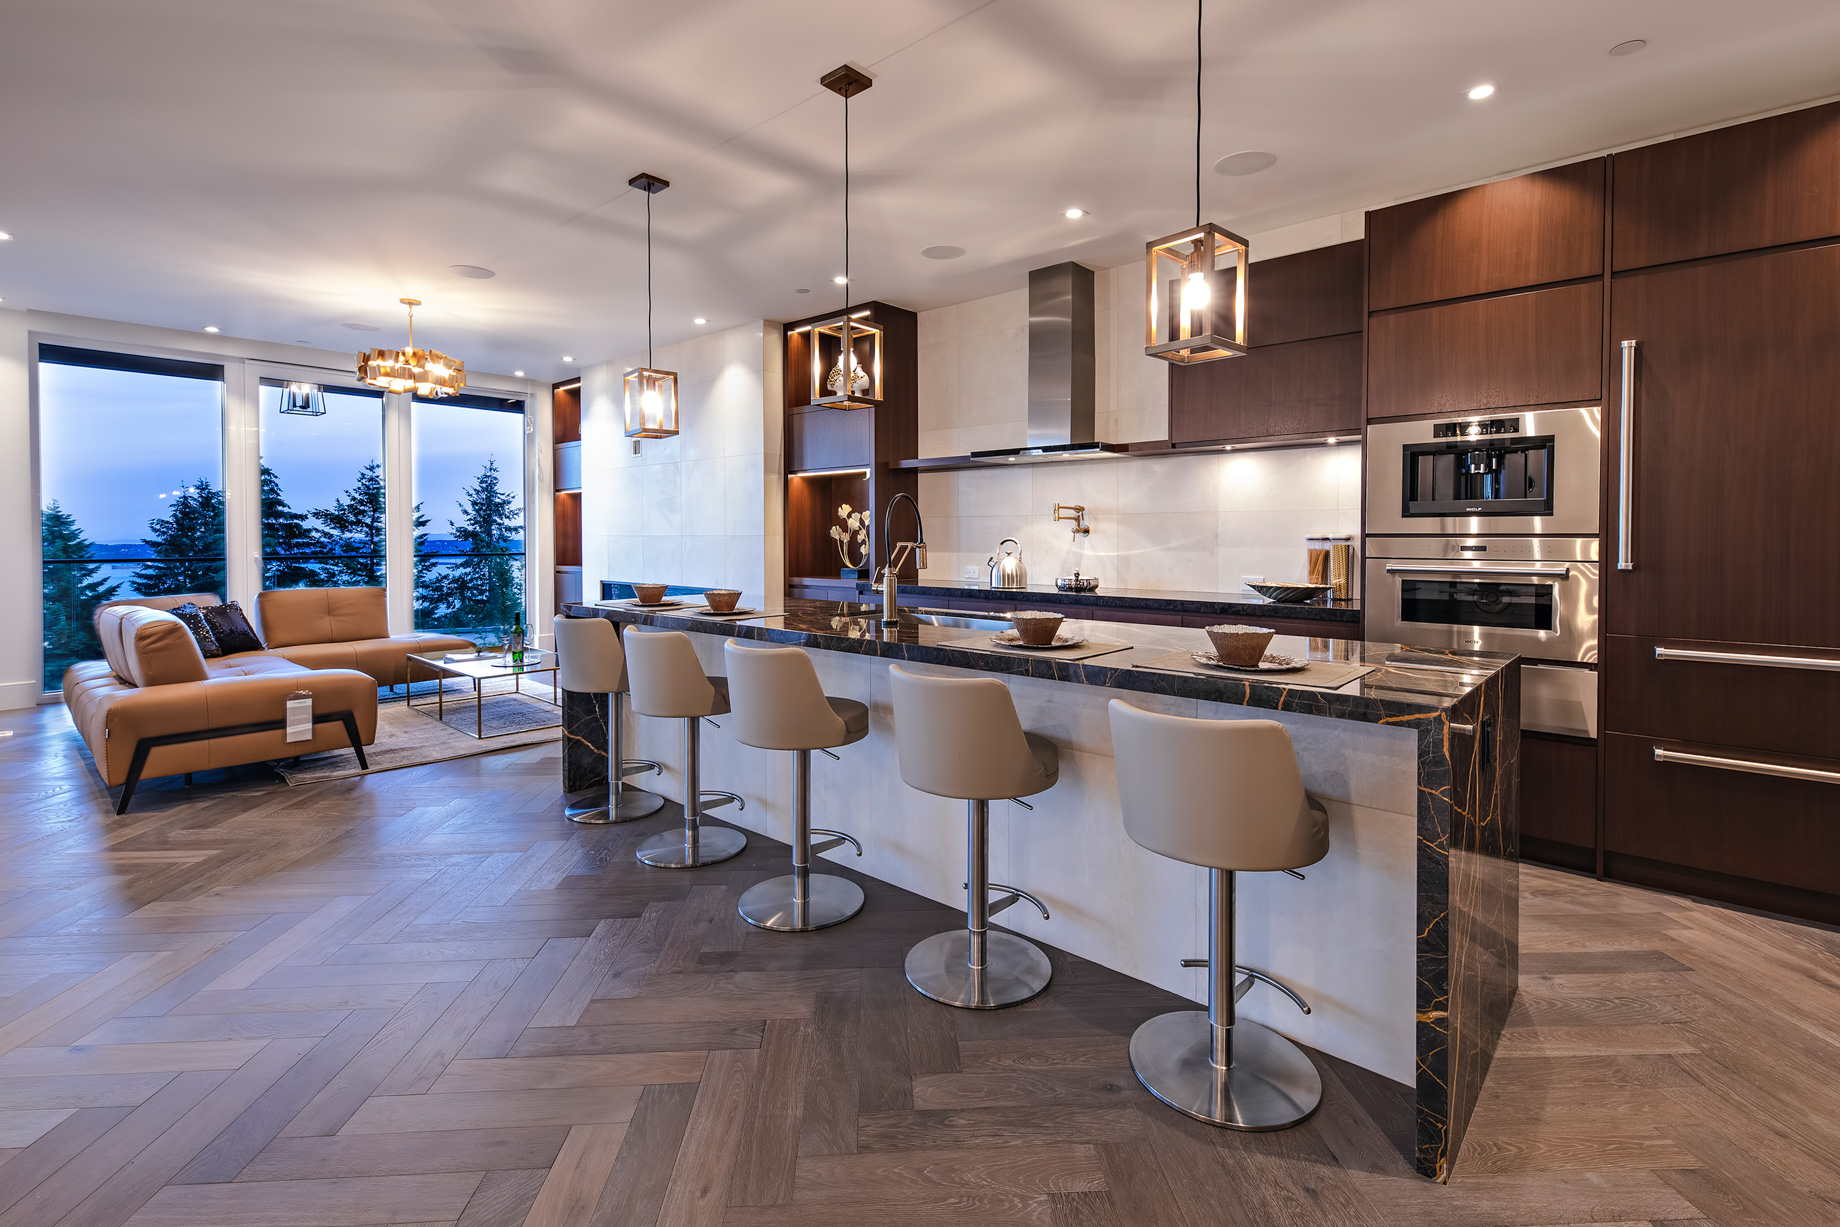 2111 Union Court, West Vancouver, BC, Canada - Kitchen - Luxury Real Estate - West Coast Modern Home